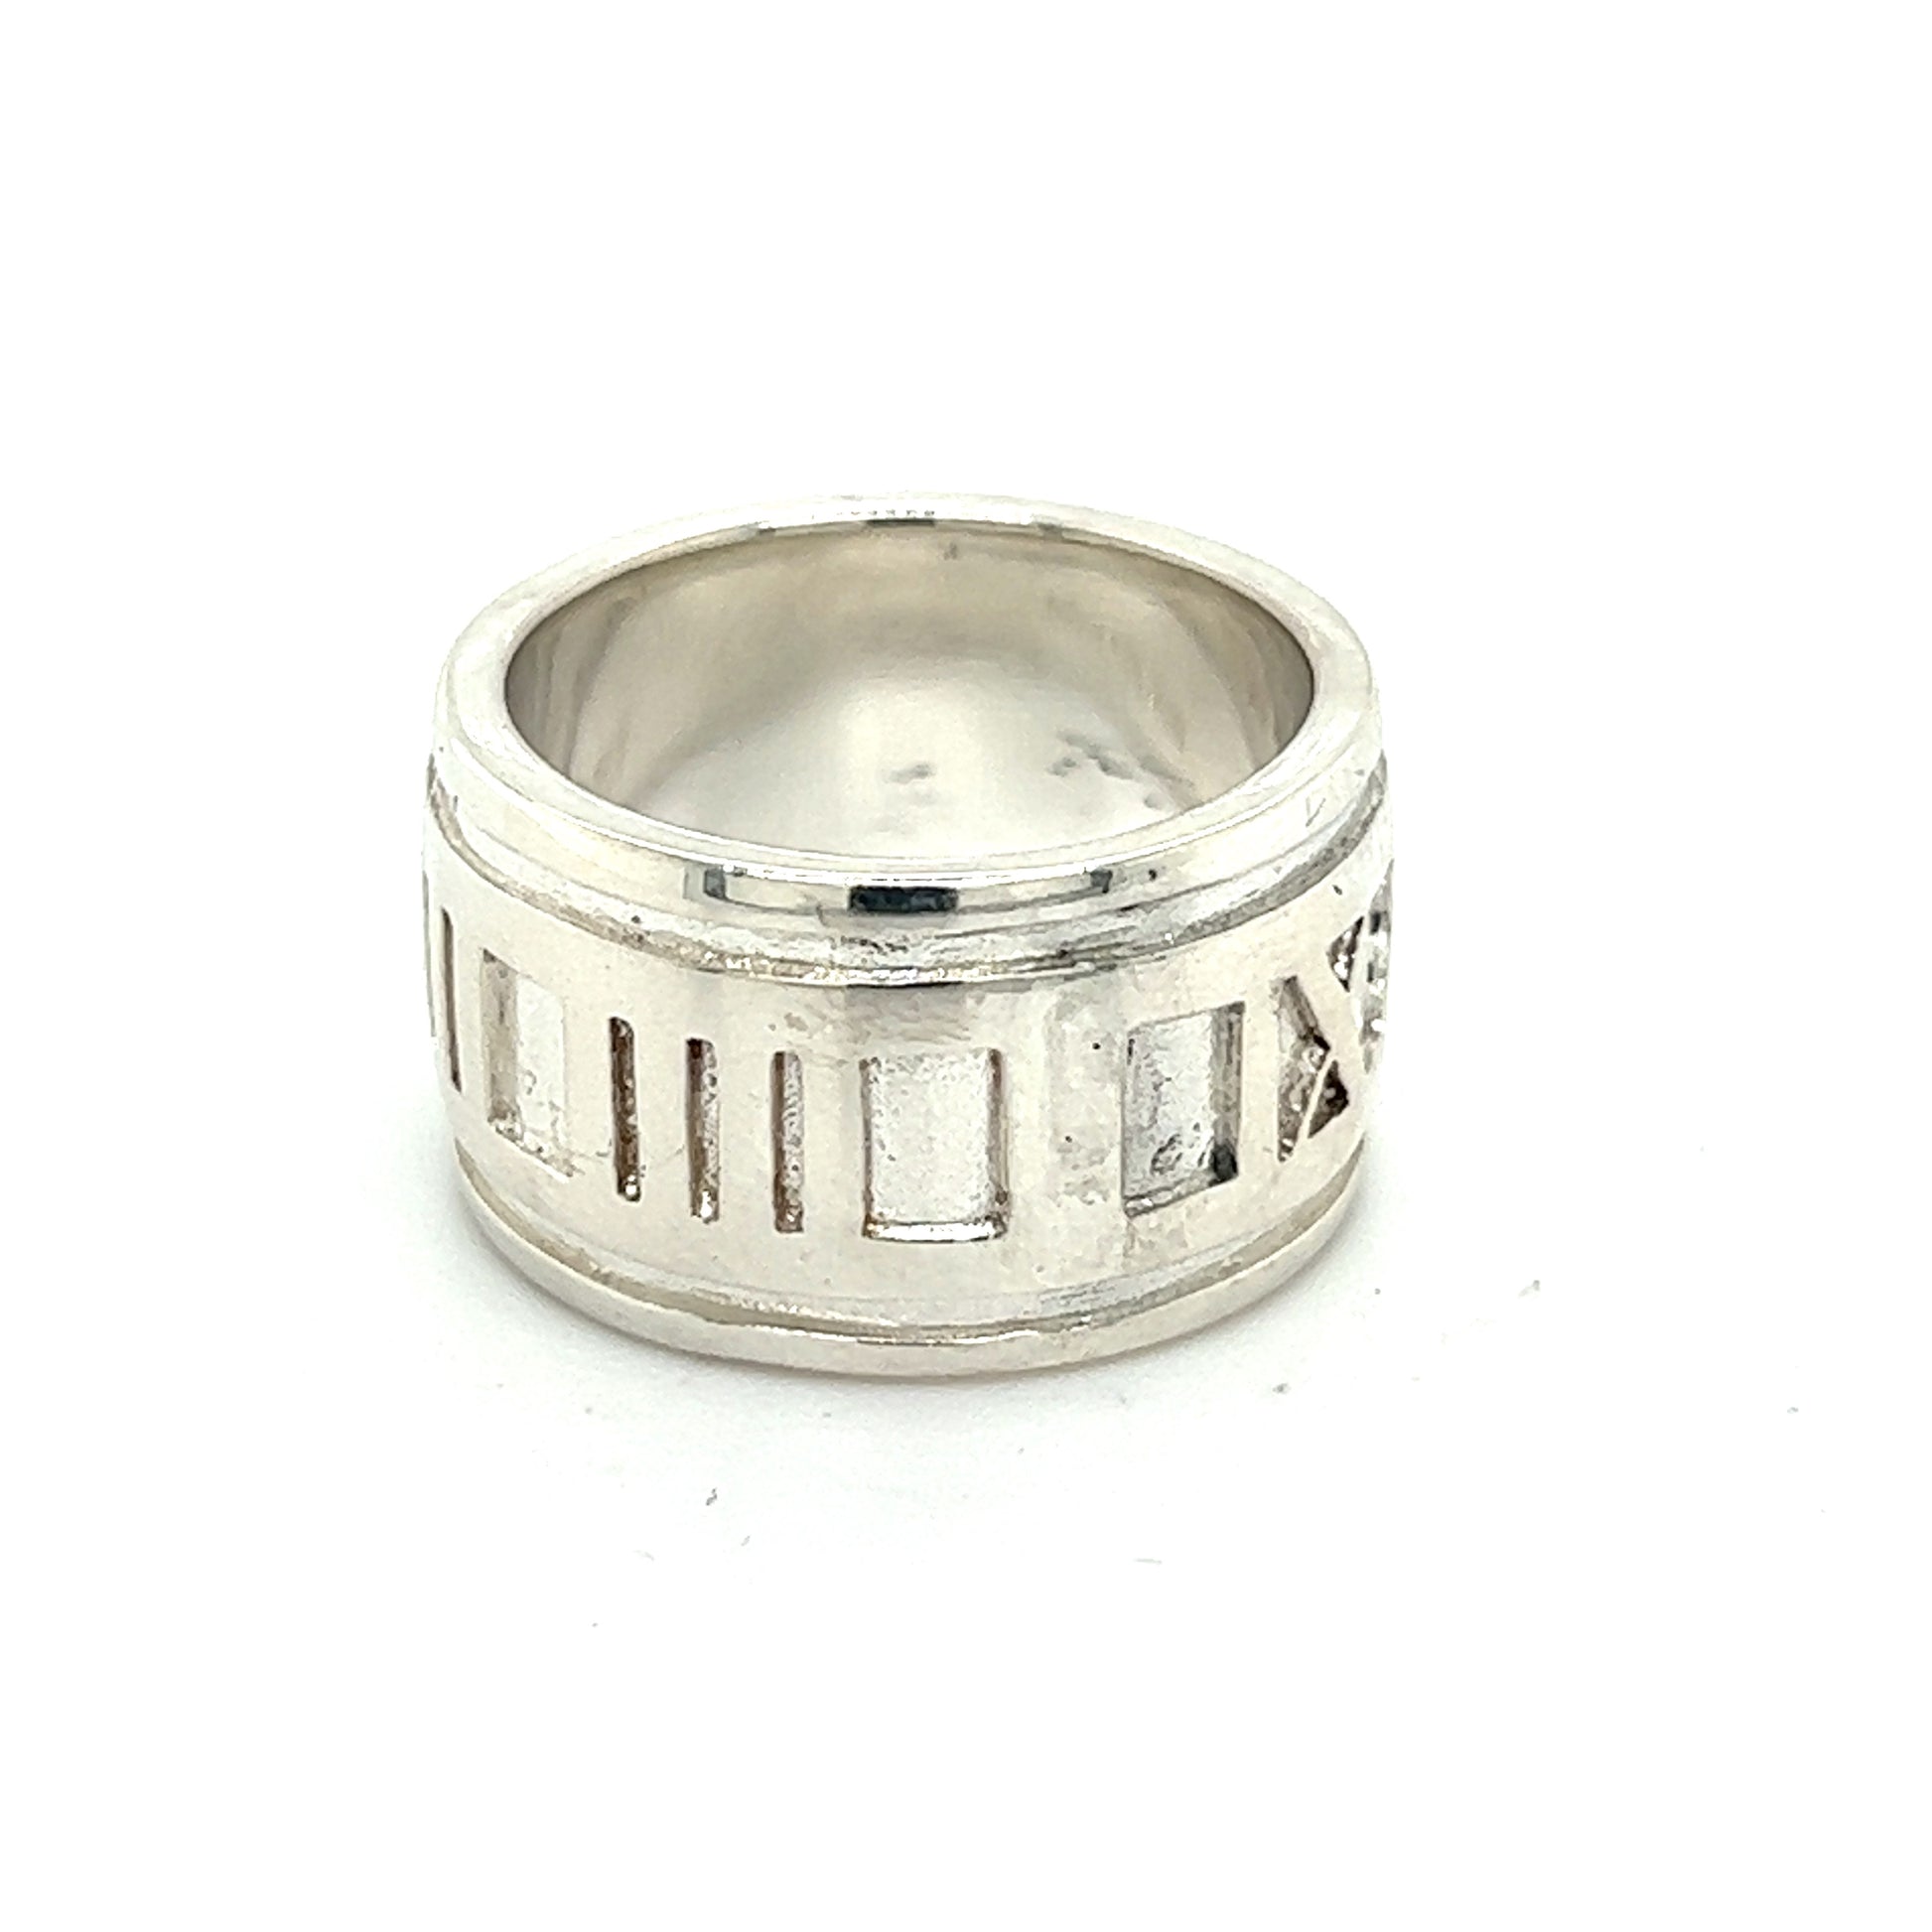 Tiffany & Co Authentic Estate Atlas Ring Size 5 Silver 11 mm TIF382 - Certified Fine Jewelry